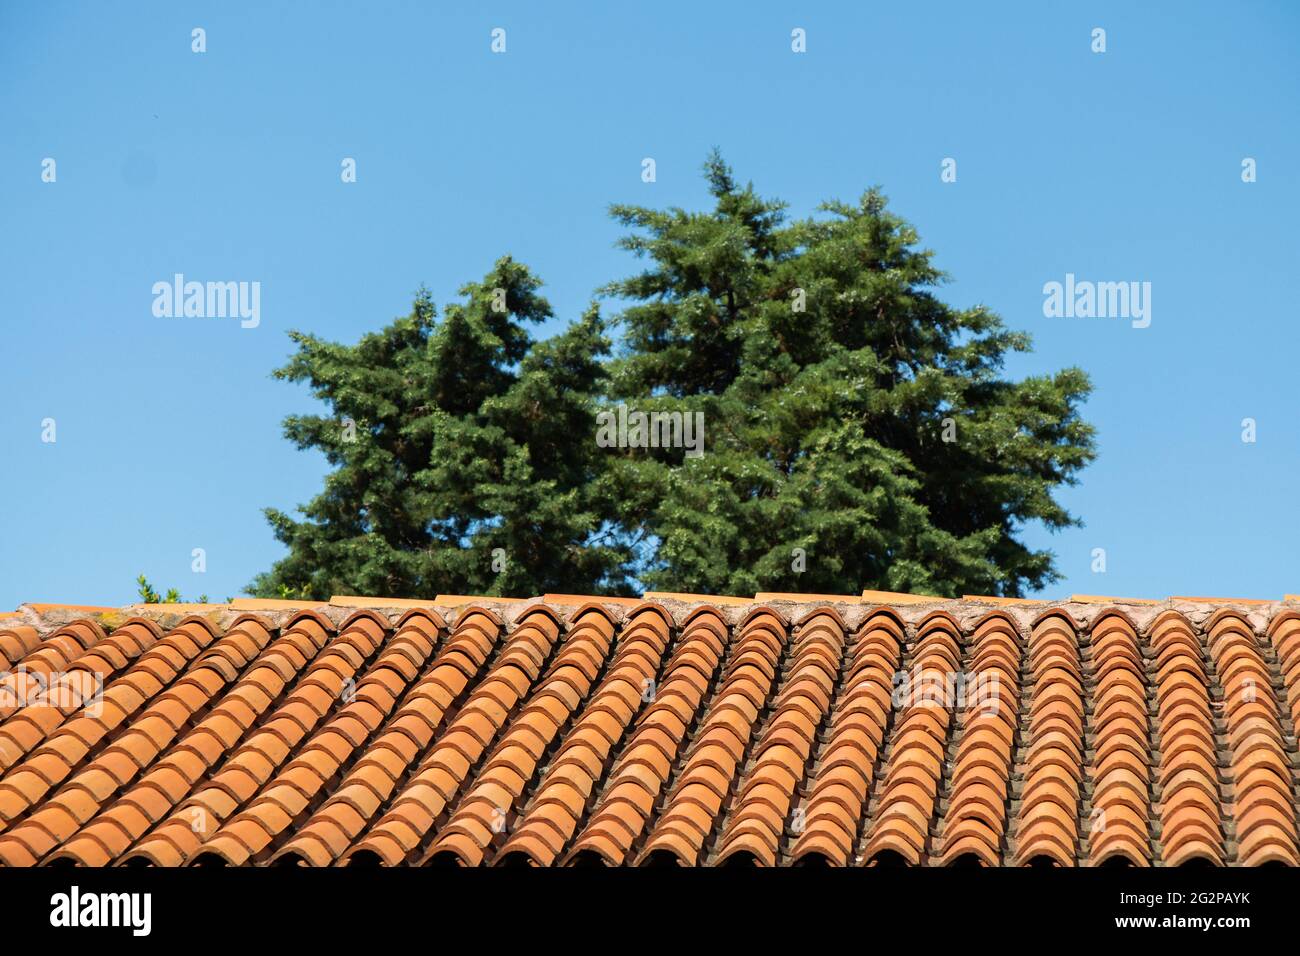 Closeupof roof tiles and green-leafed trees against a clear blue sky Stock Photo